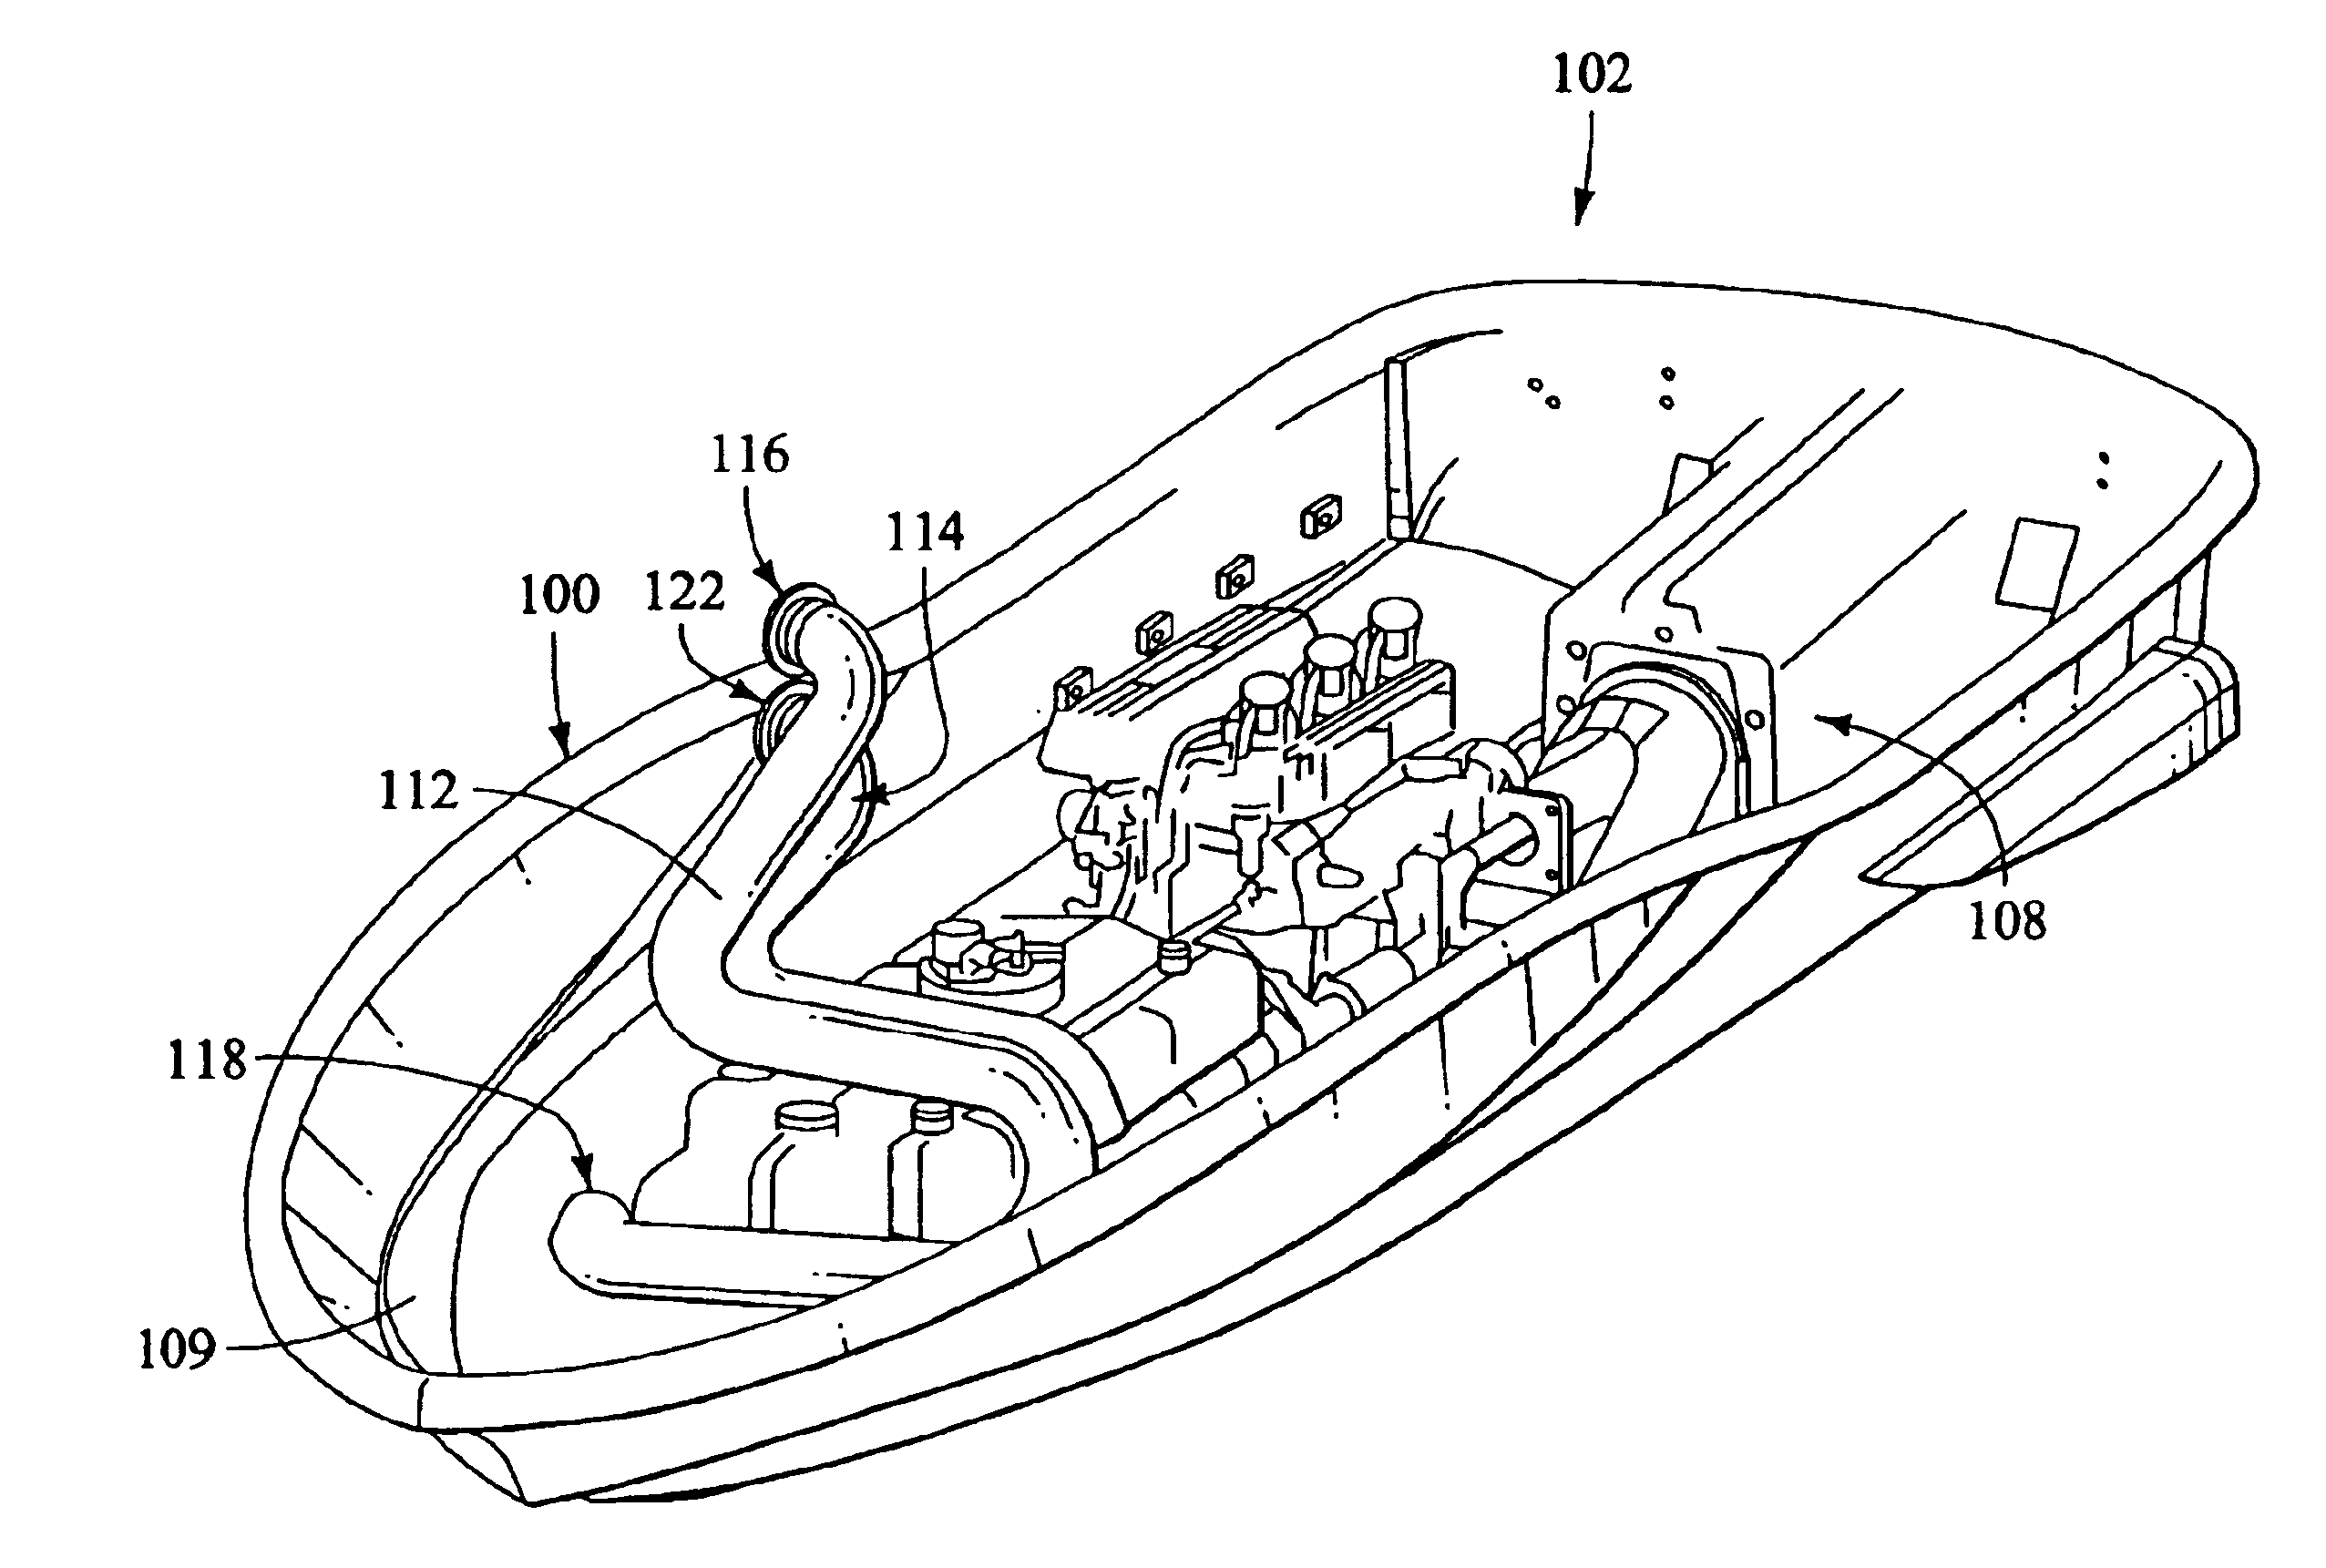 Air ventilation system for a watercraft